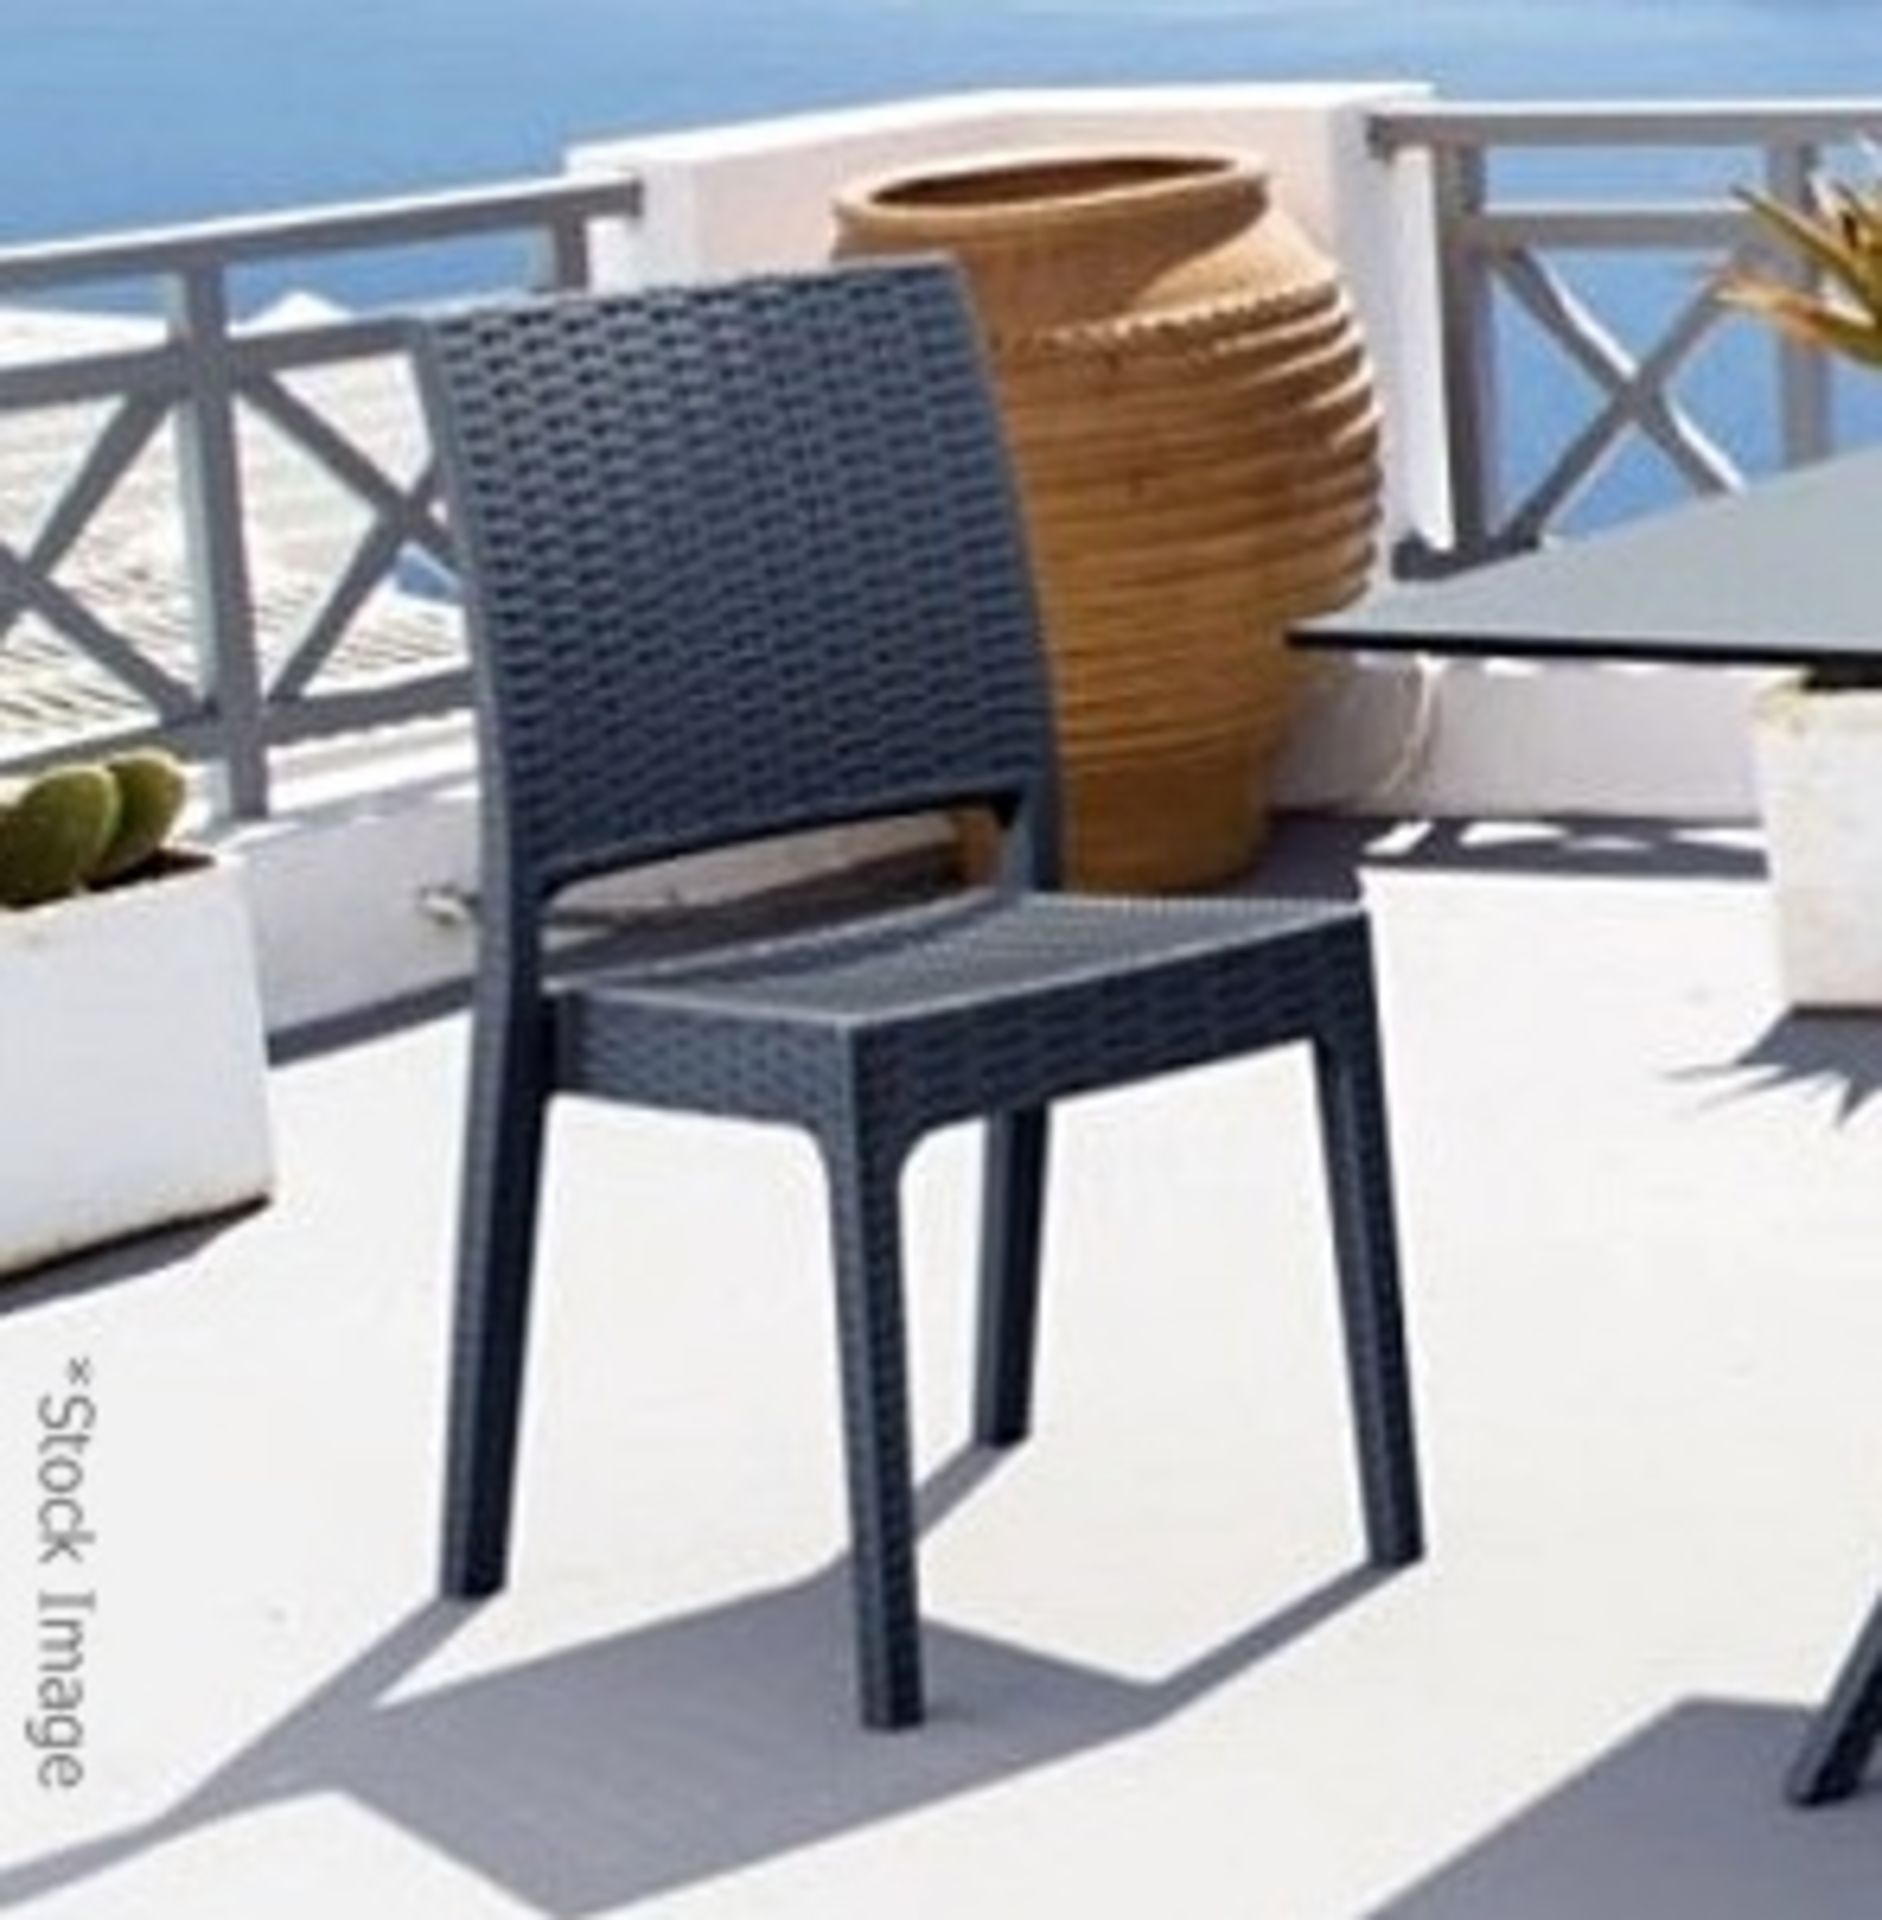 4 x SIESTA EXCLUSIVE 'Florida' Commercial Stackable Rattan-style Chairs In Dark Grey -CL987 -